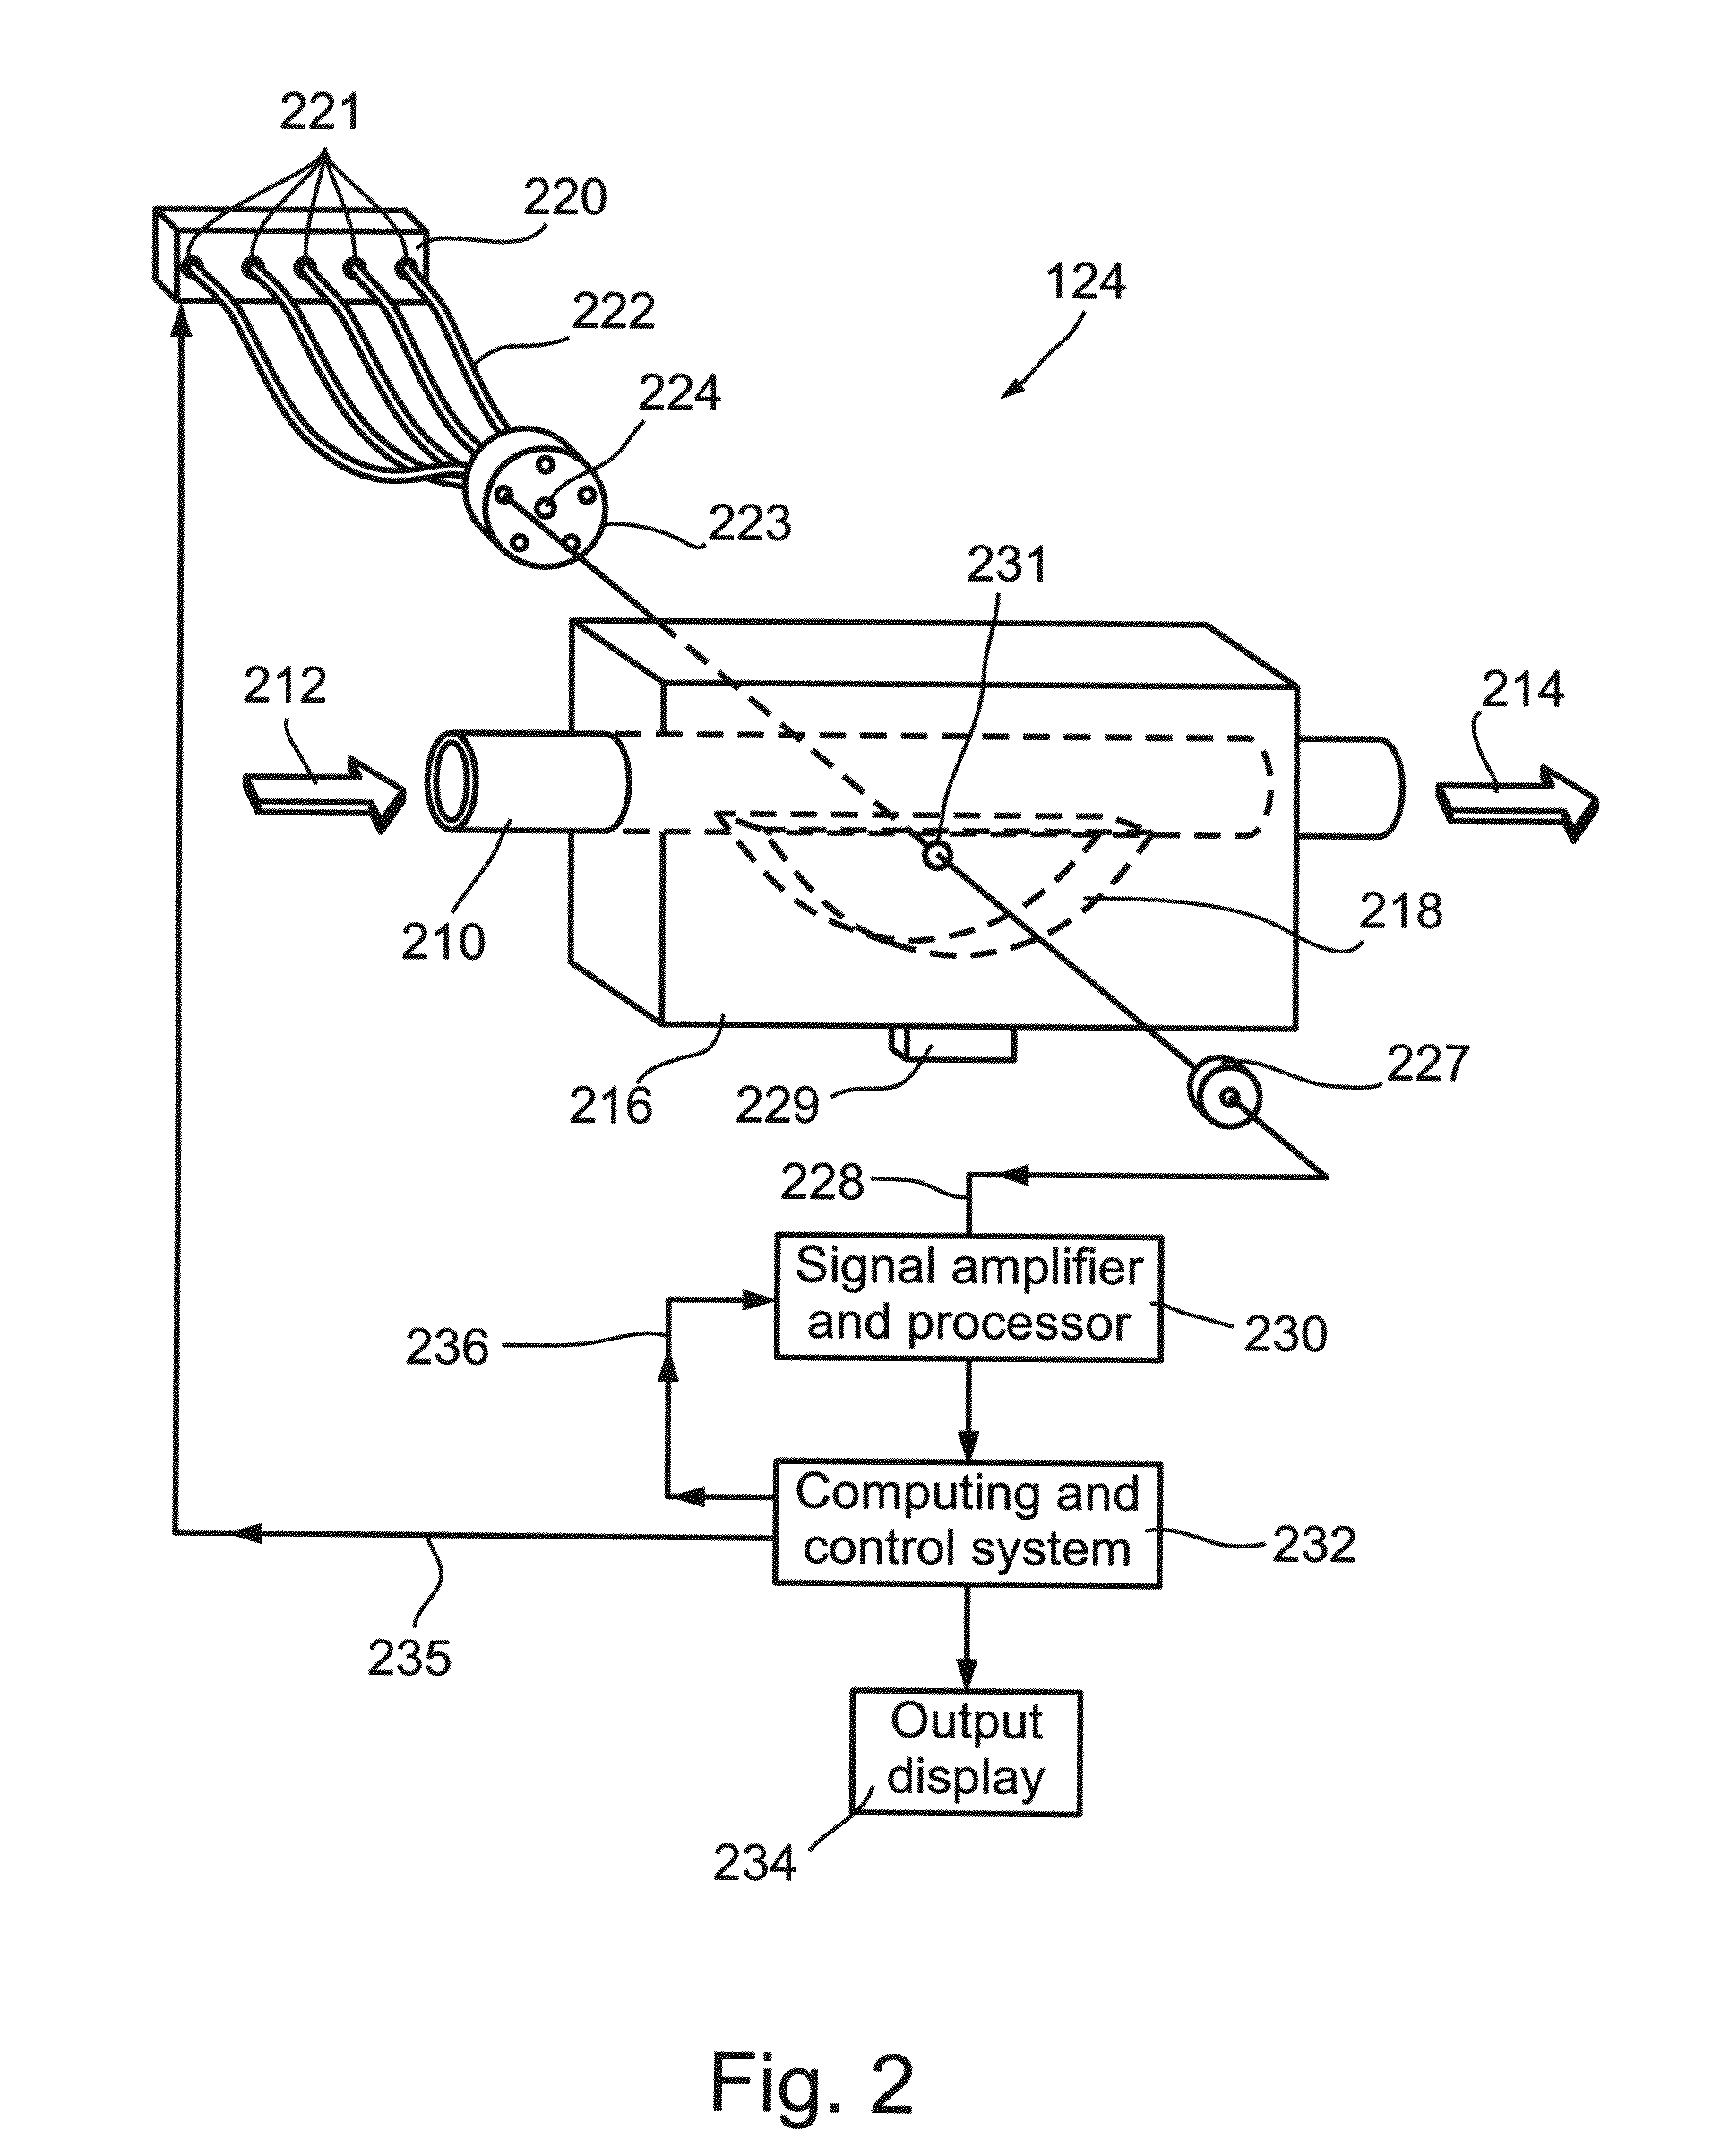 System and method for on-line analysis and sorting of milk coagulation properties